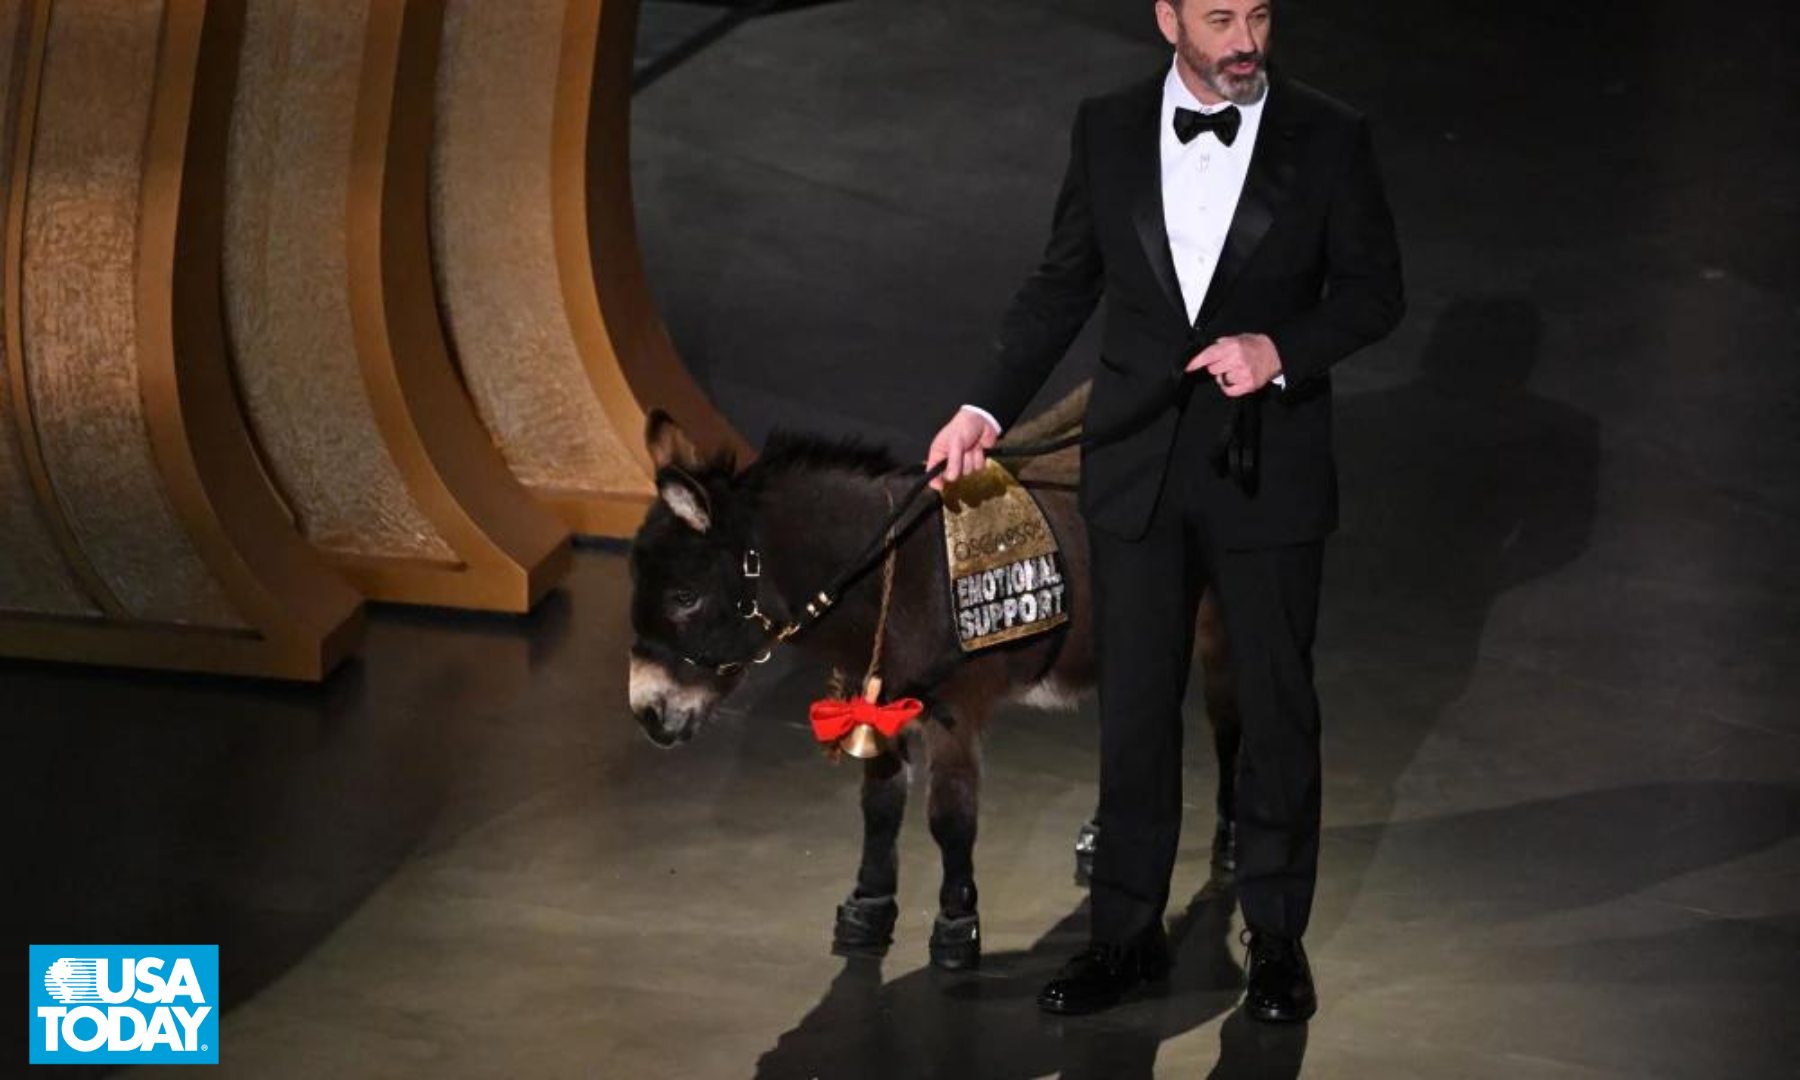 USA TODAY Photo credit CLB Boots at Academy Awards with donkey & Jimmy Kimmel